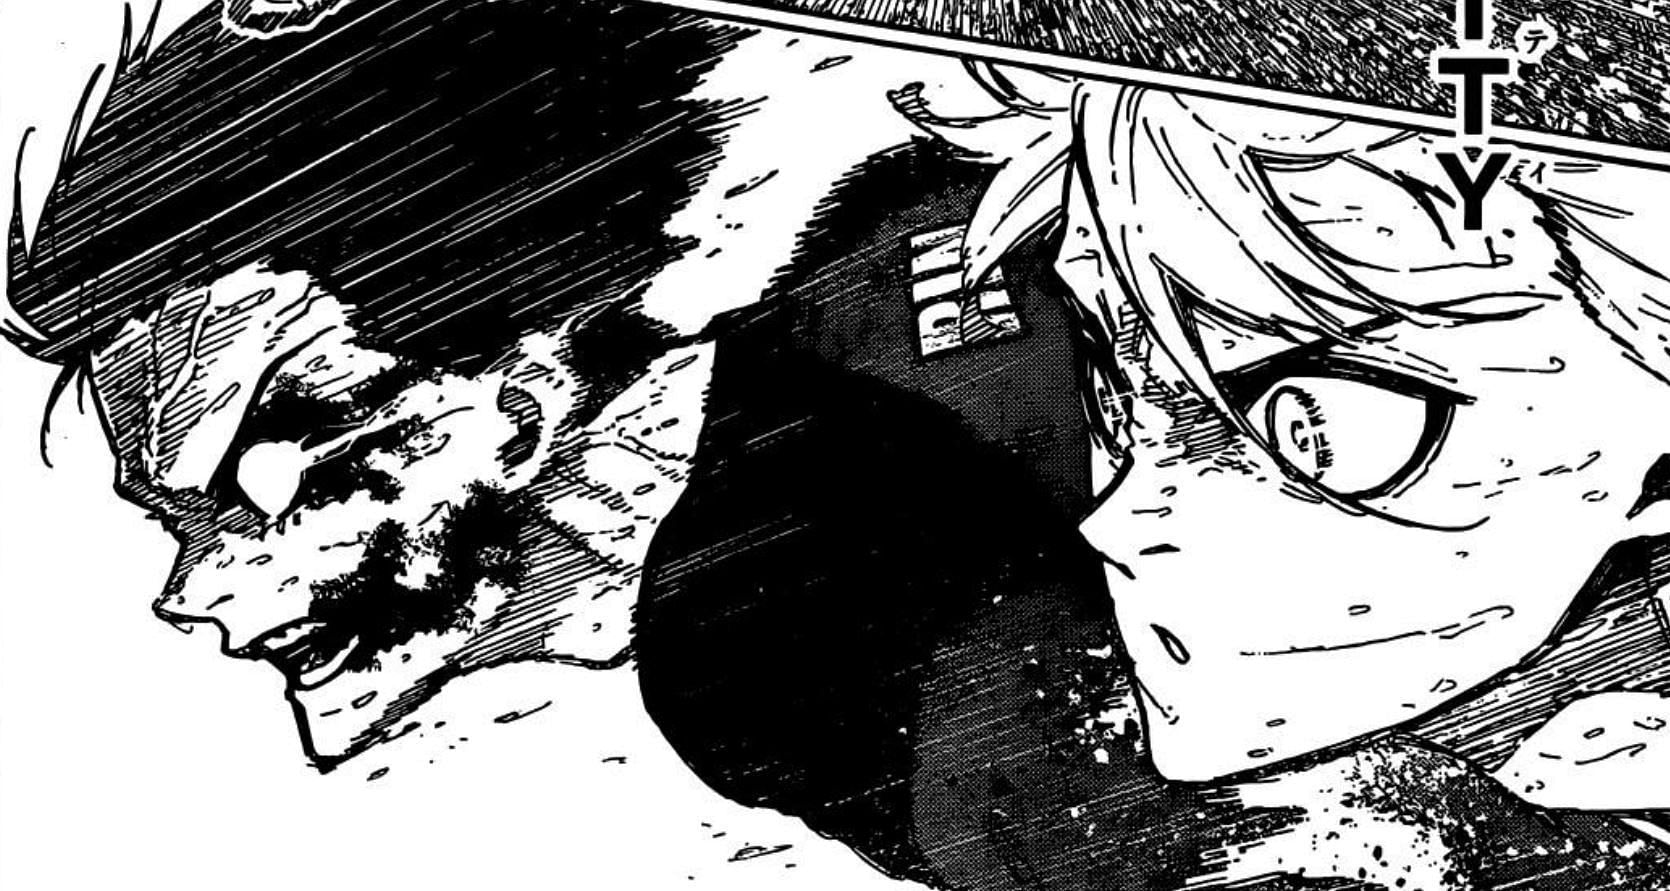 Blue Lock chapter 239: Exact release date and time, where to read